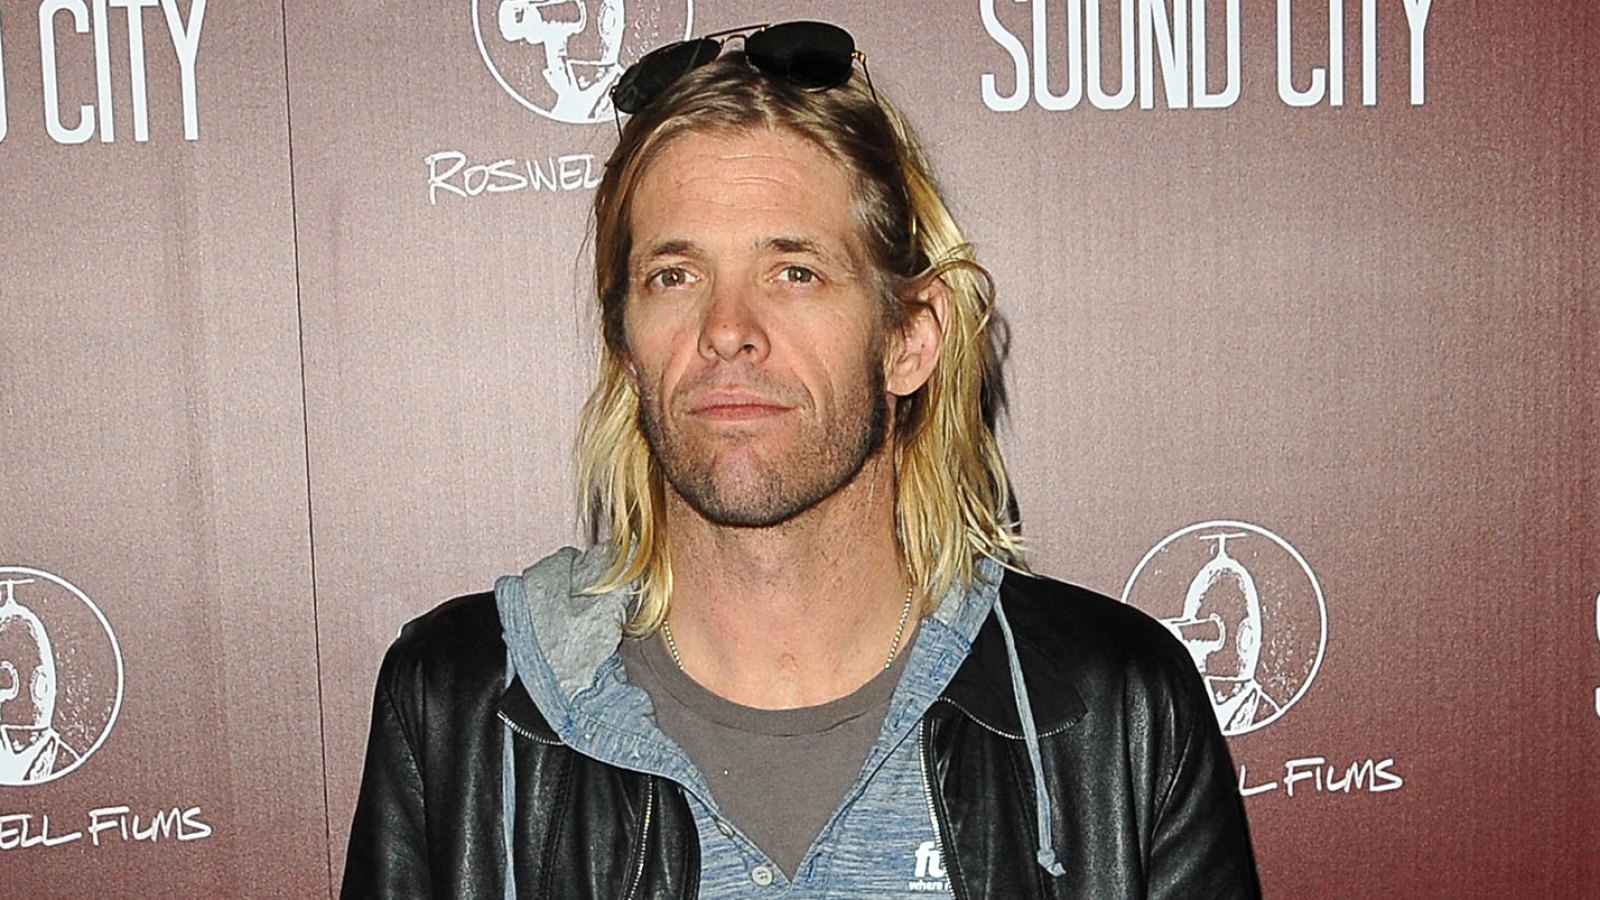 Foo Fighters Drummer Taylor Hawkins Had 10 Substances in His System Before His Death, Officials Say